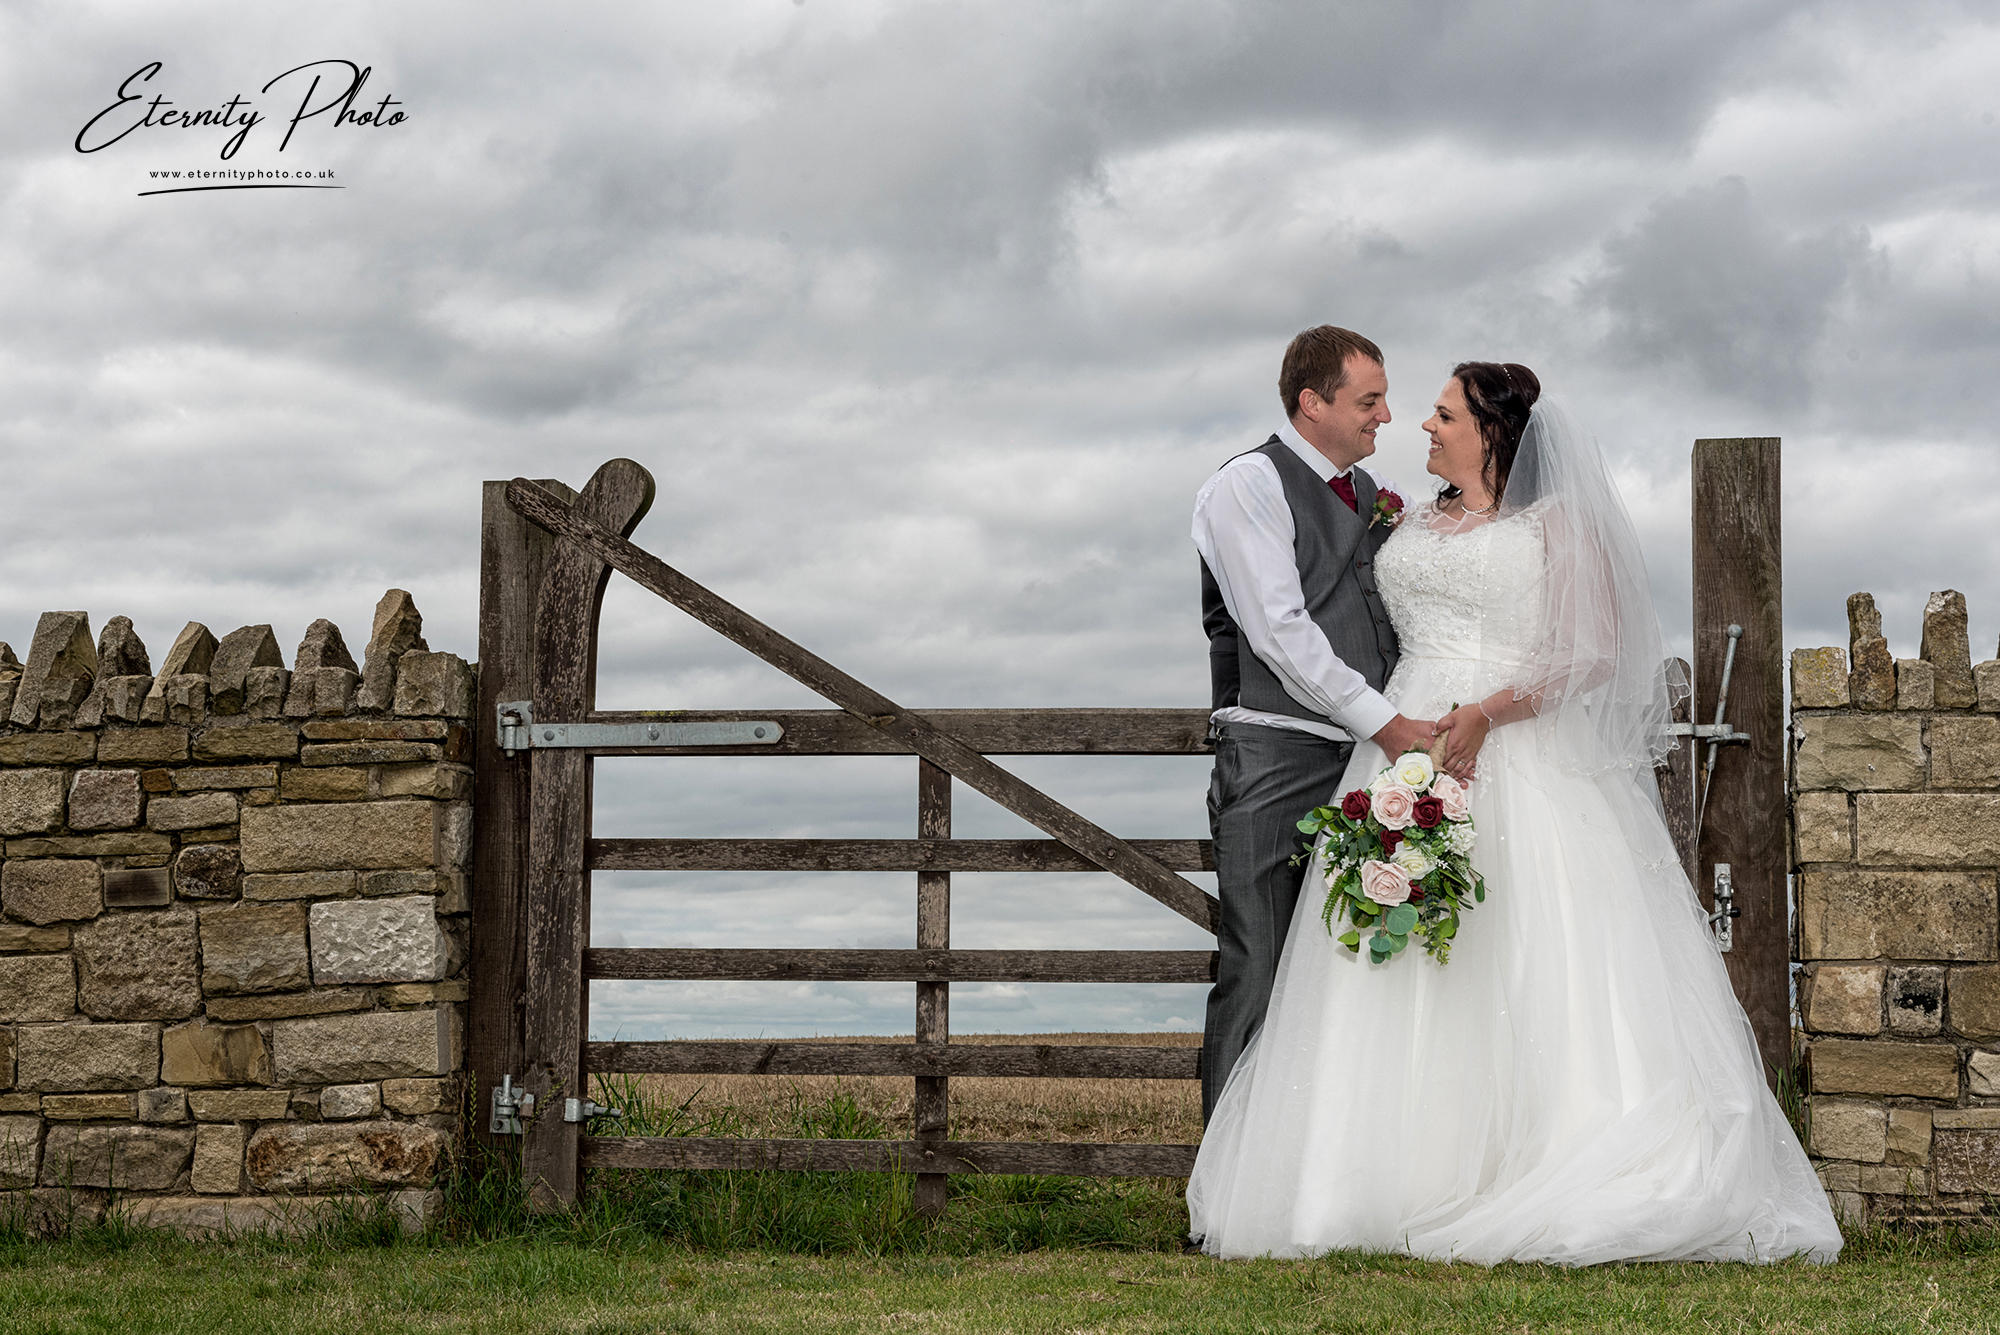 Bride and groom embracing by countryside gate.